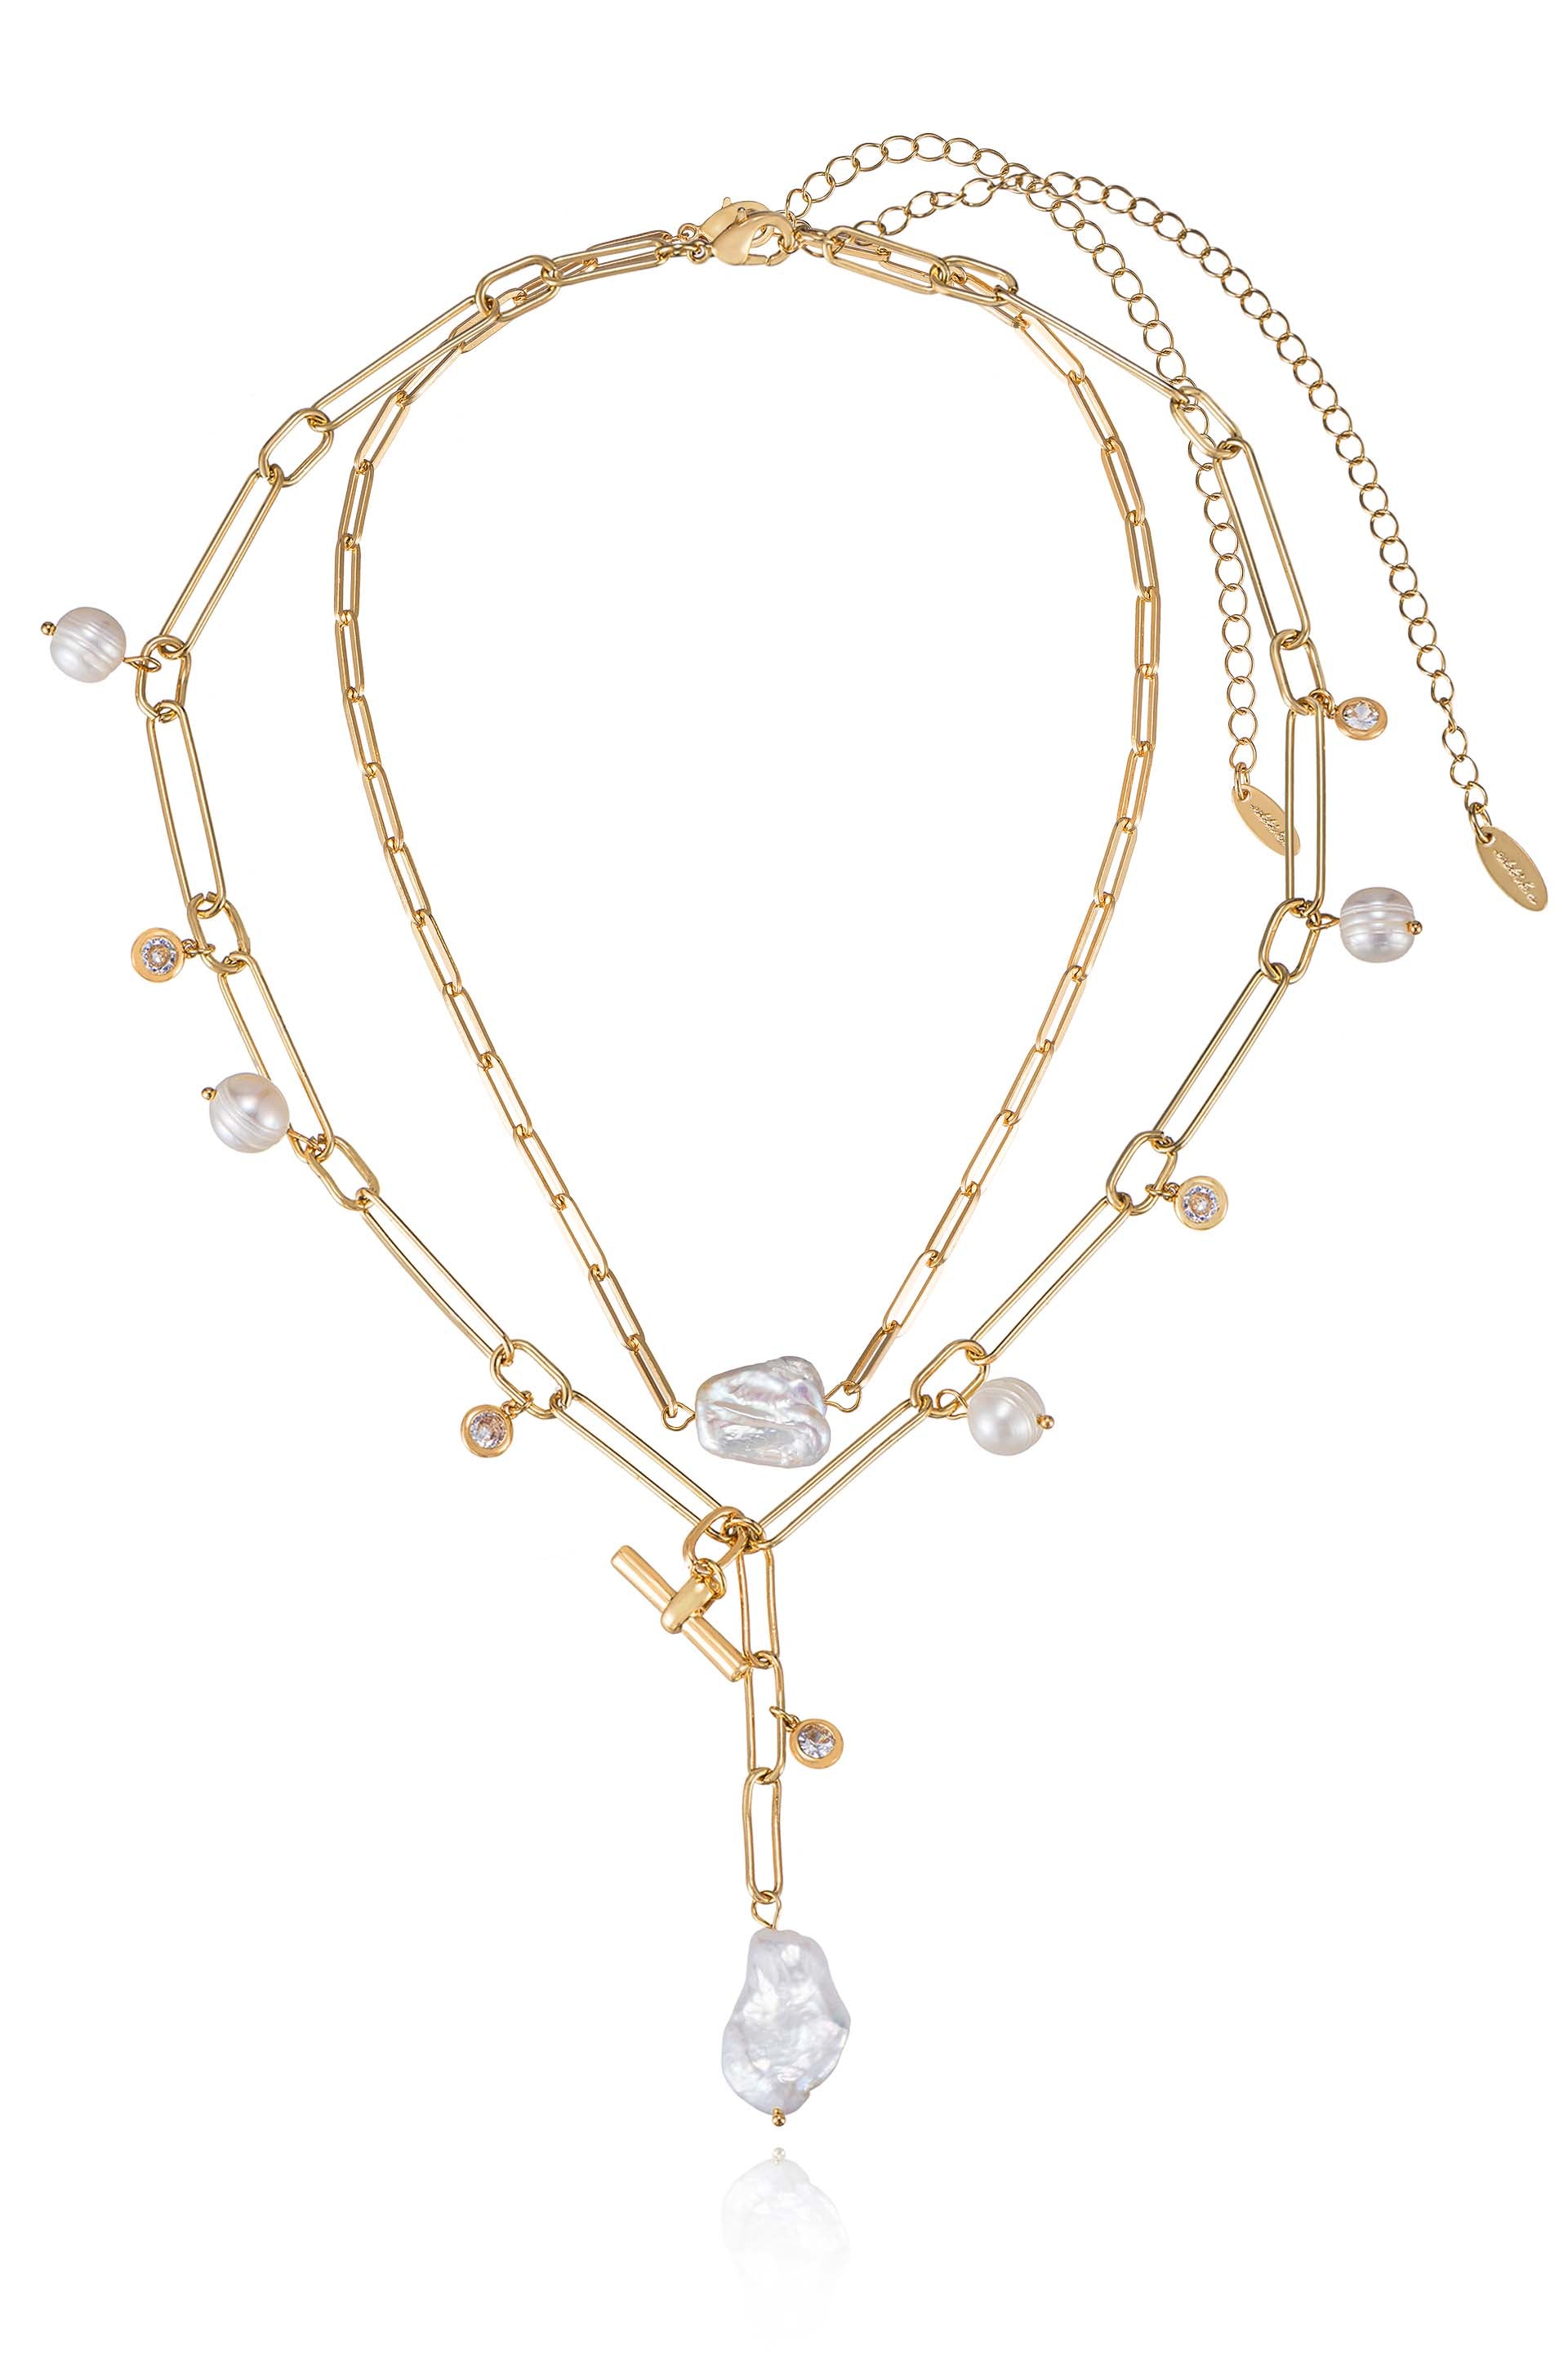 Deep Water Pearl 18k Gold Plated Lariat Necklace